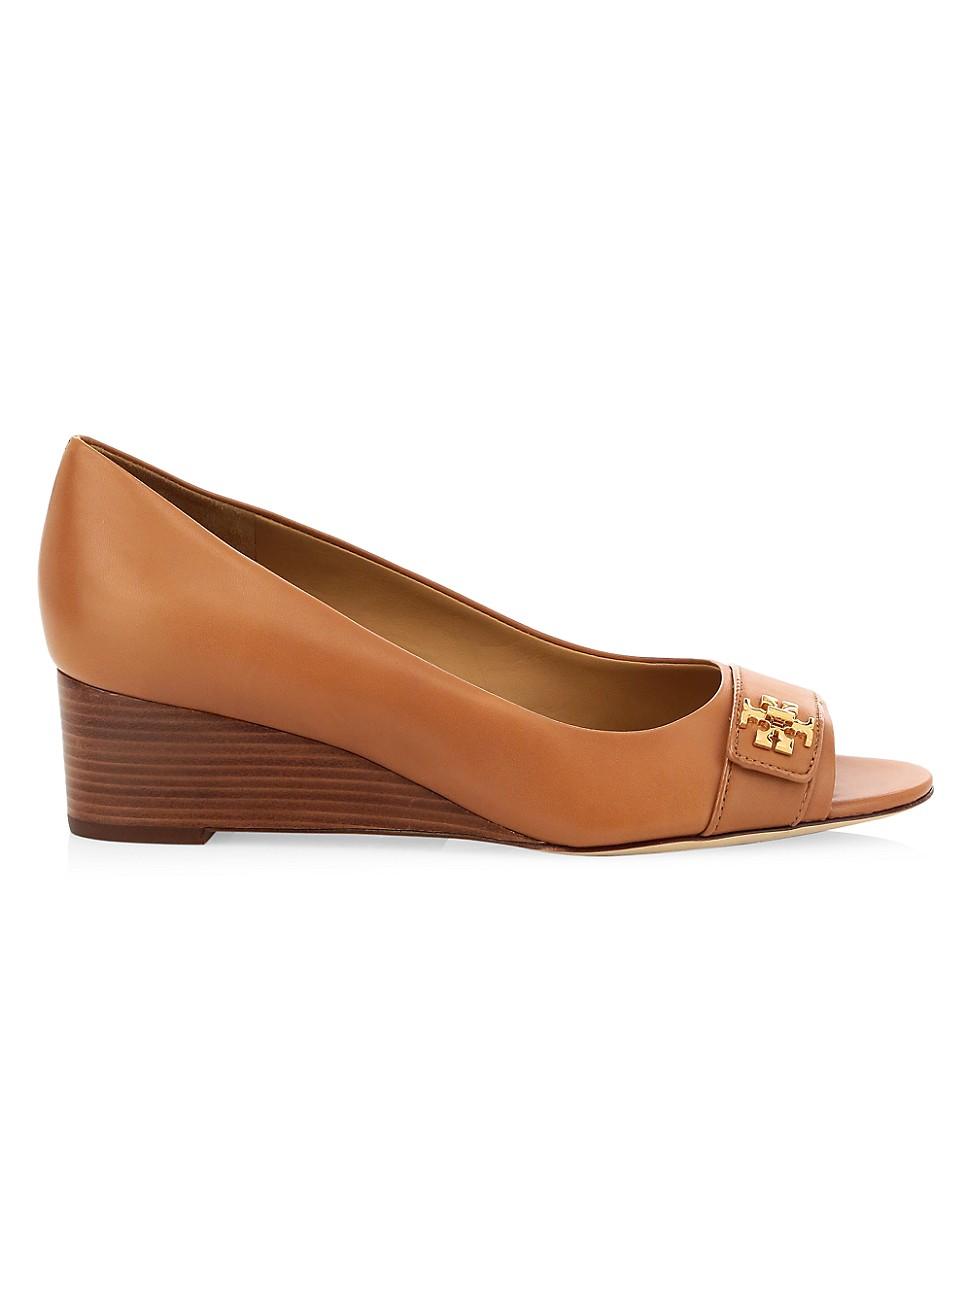 Tory Burch Kira Open-toe Leather Wedge Pumps in Brown | Lyst